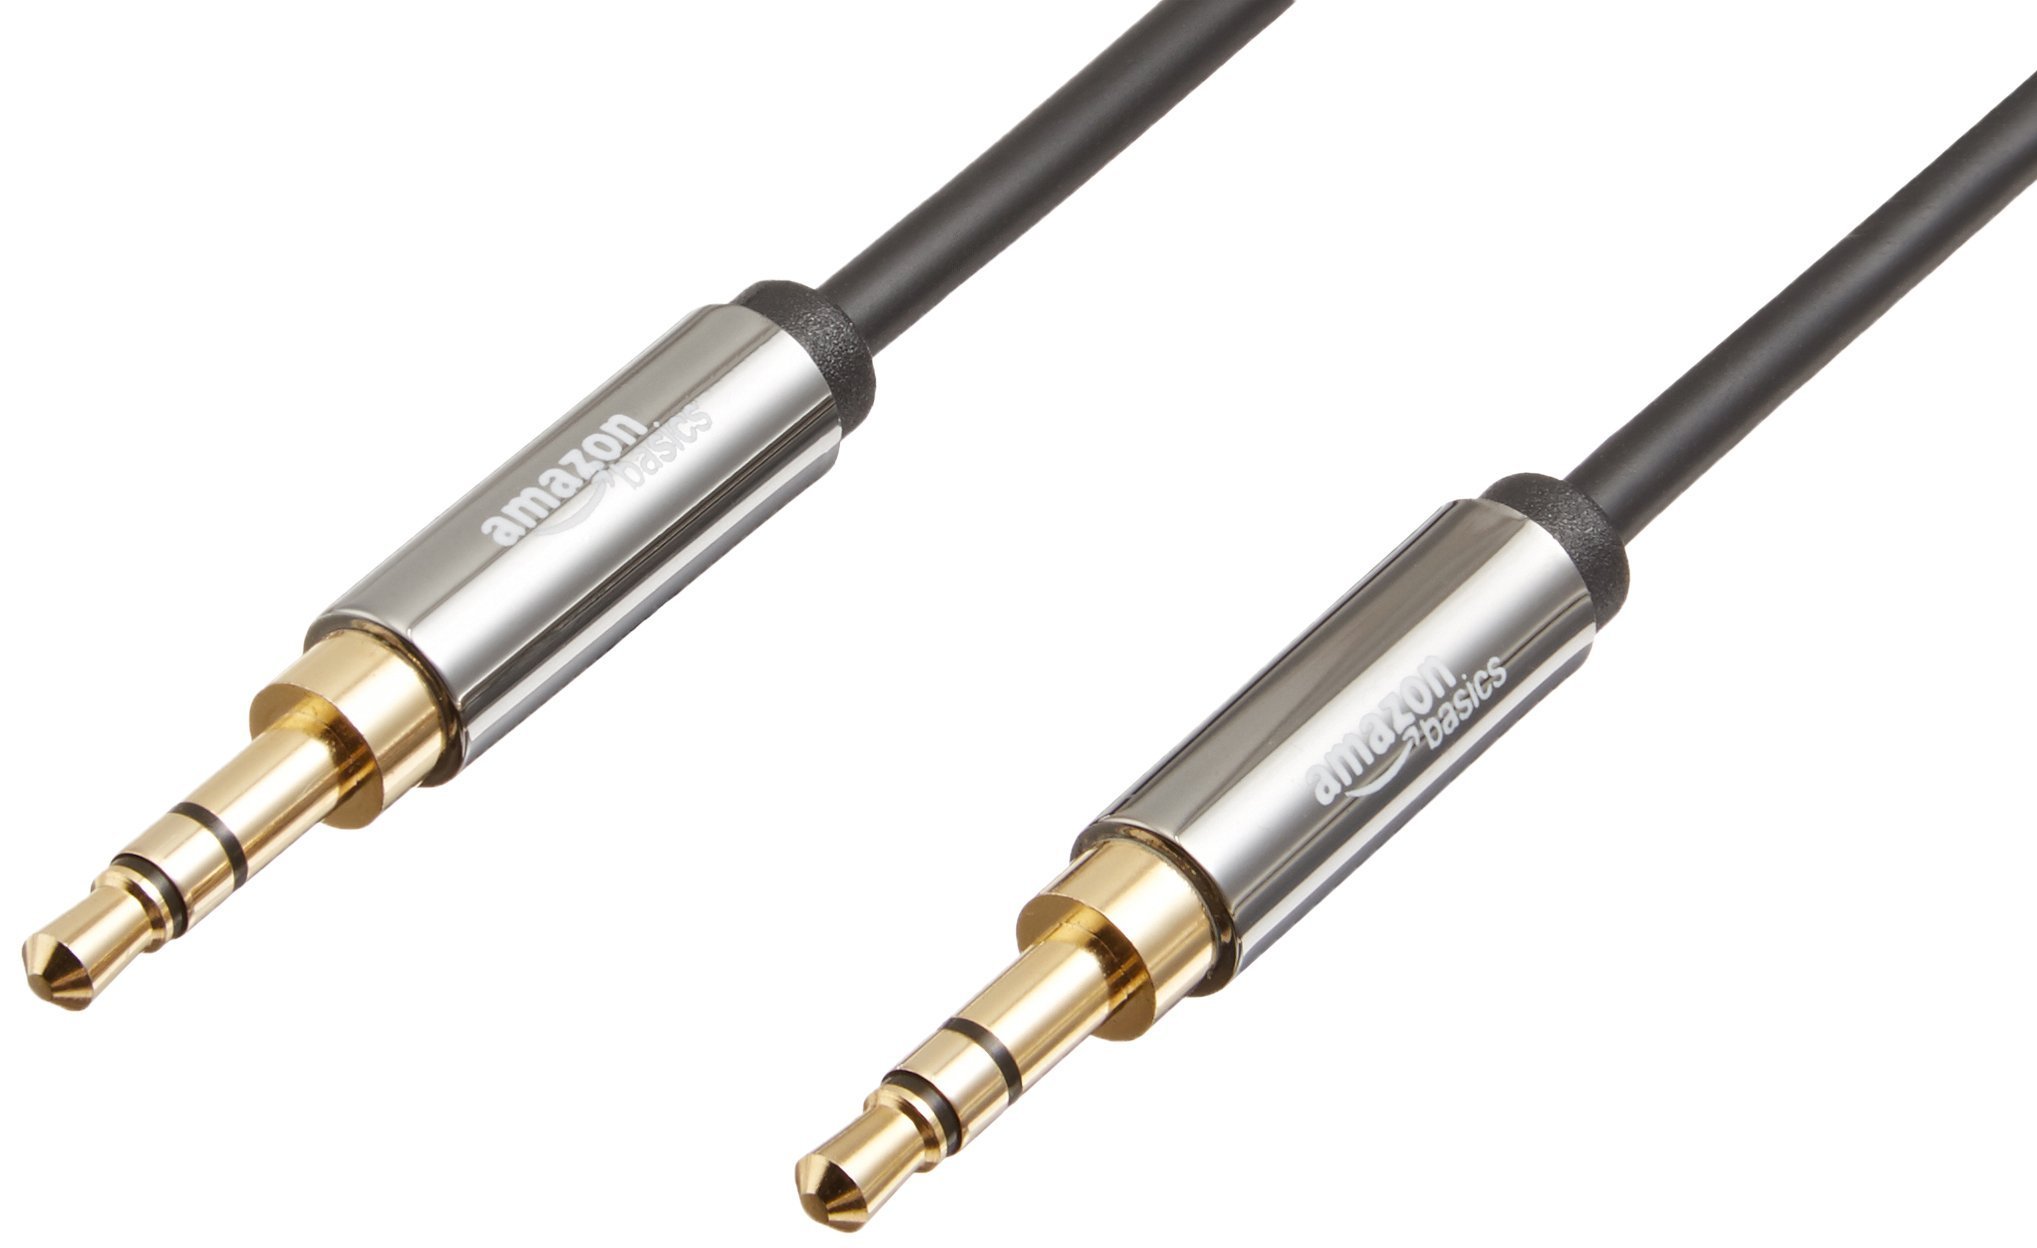 Belkin 3.5mm Audio + Charge Rockstar & AmazonBasics 3.5 mm Male to Male Stereo Audio Aux Cable, 4 Feet, 1.2 Meters